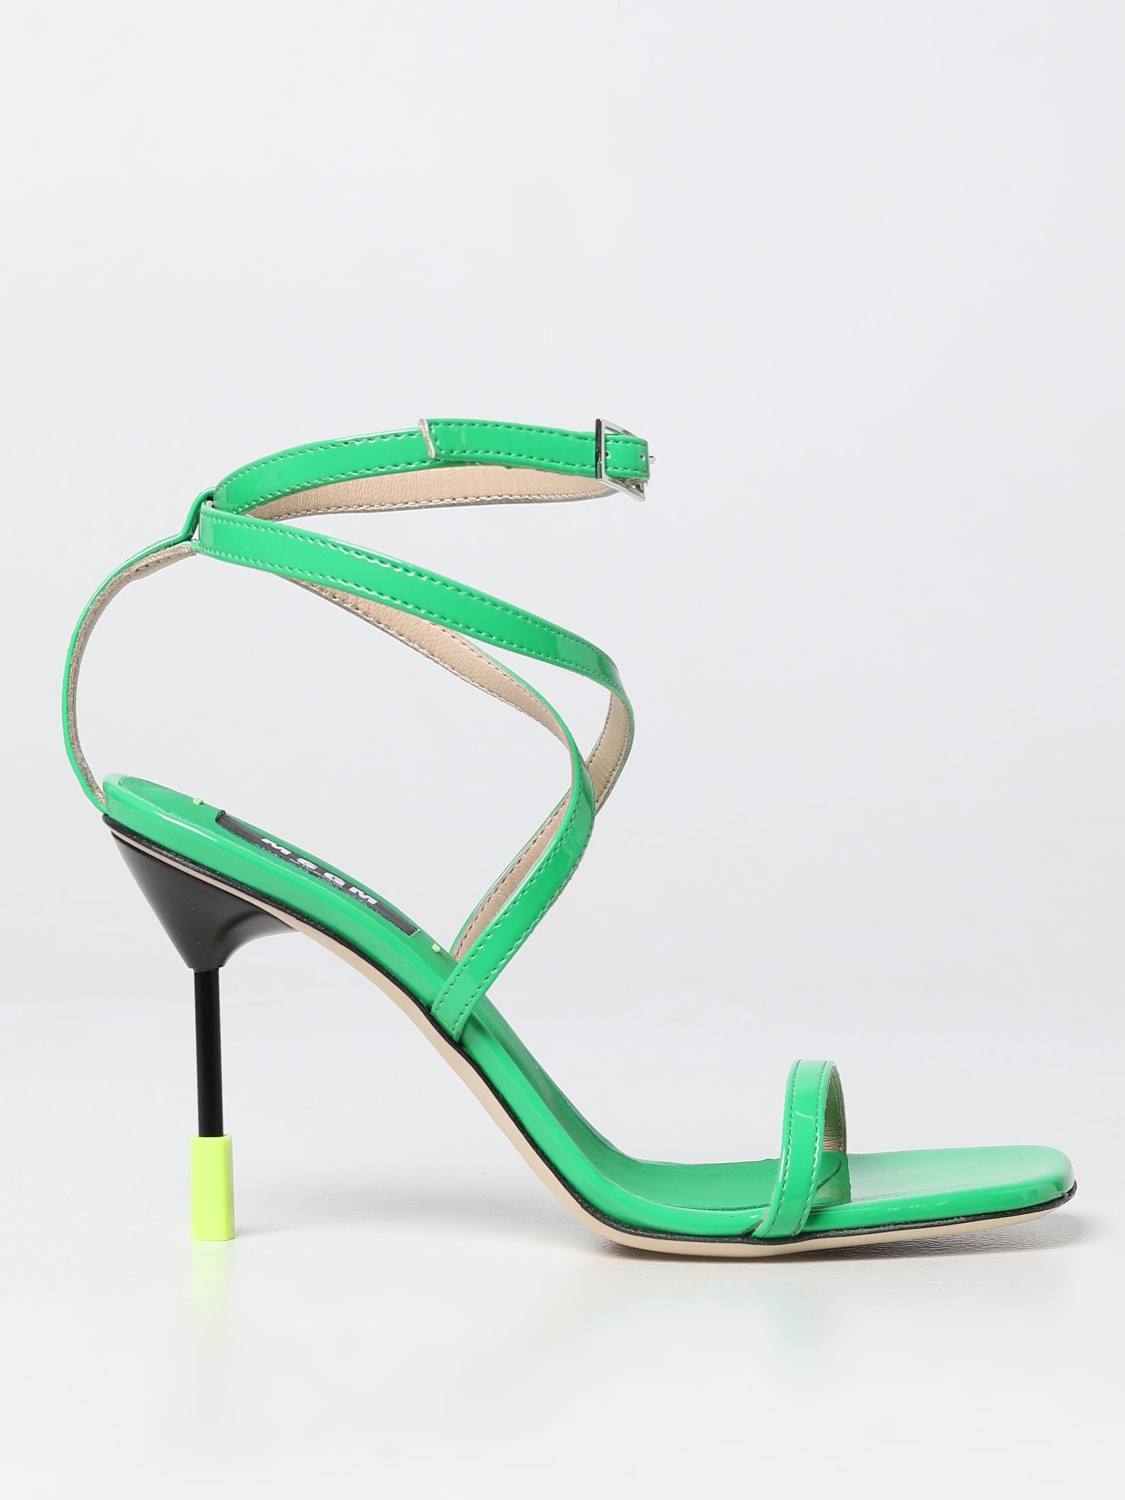 Msgm -  sandals in patent leather